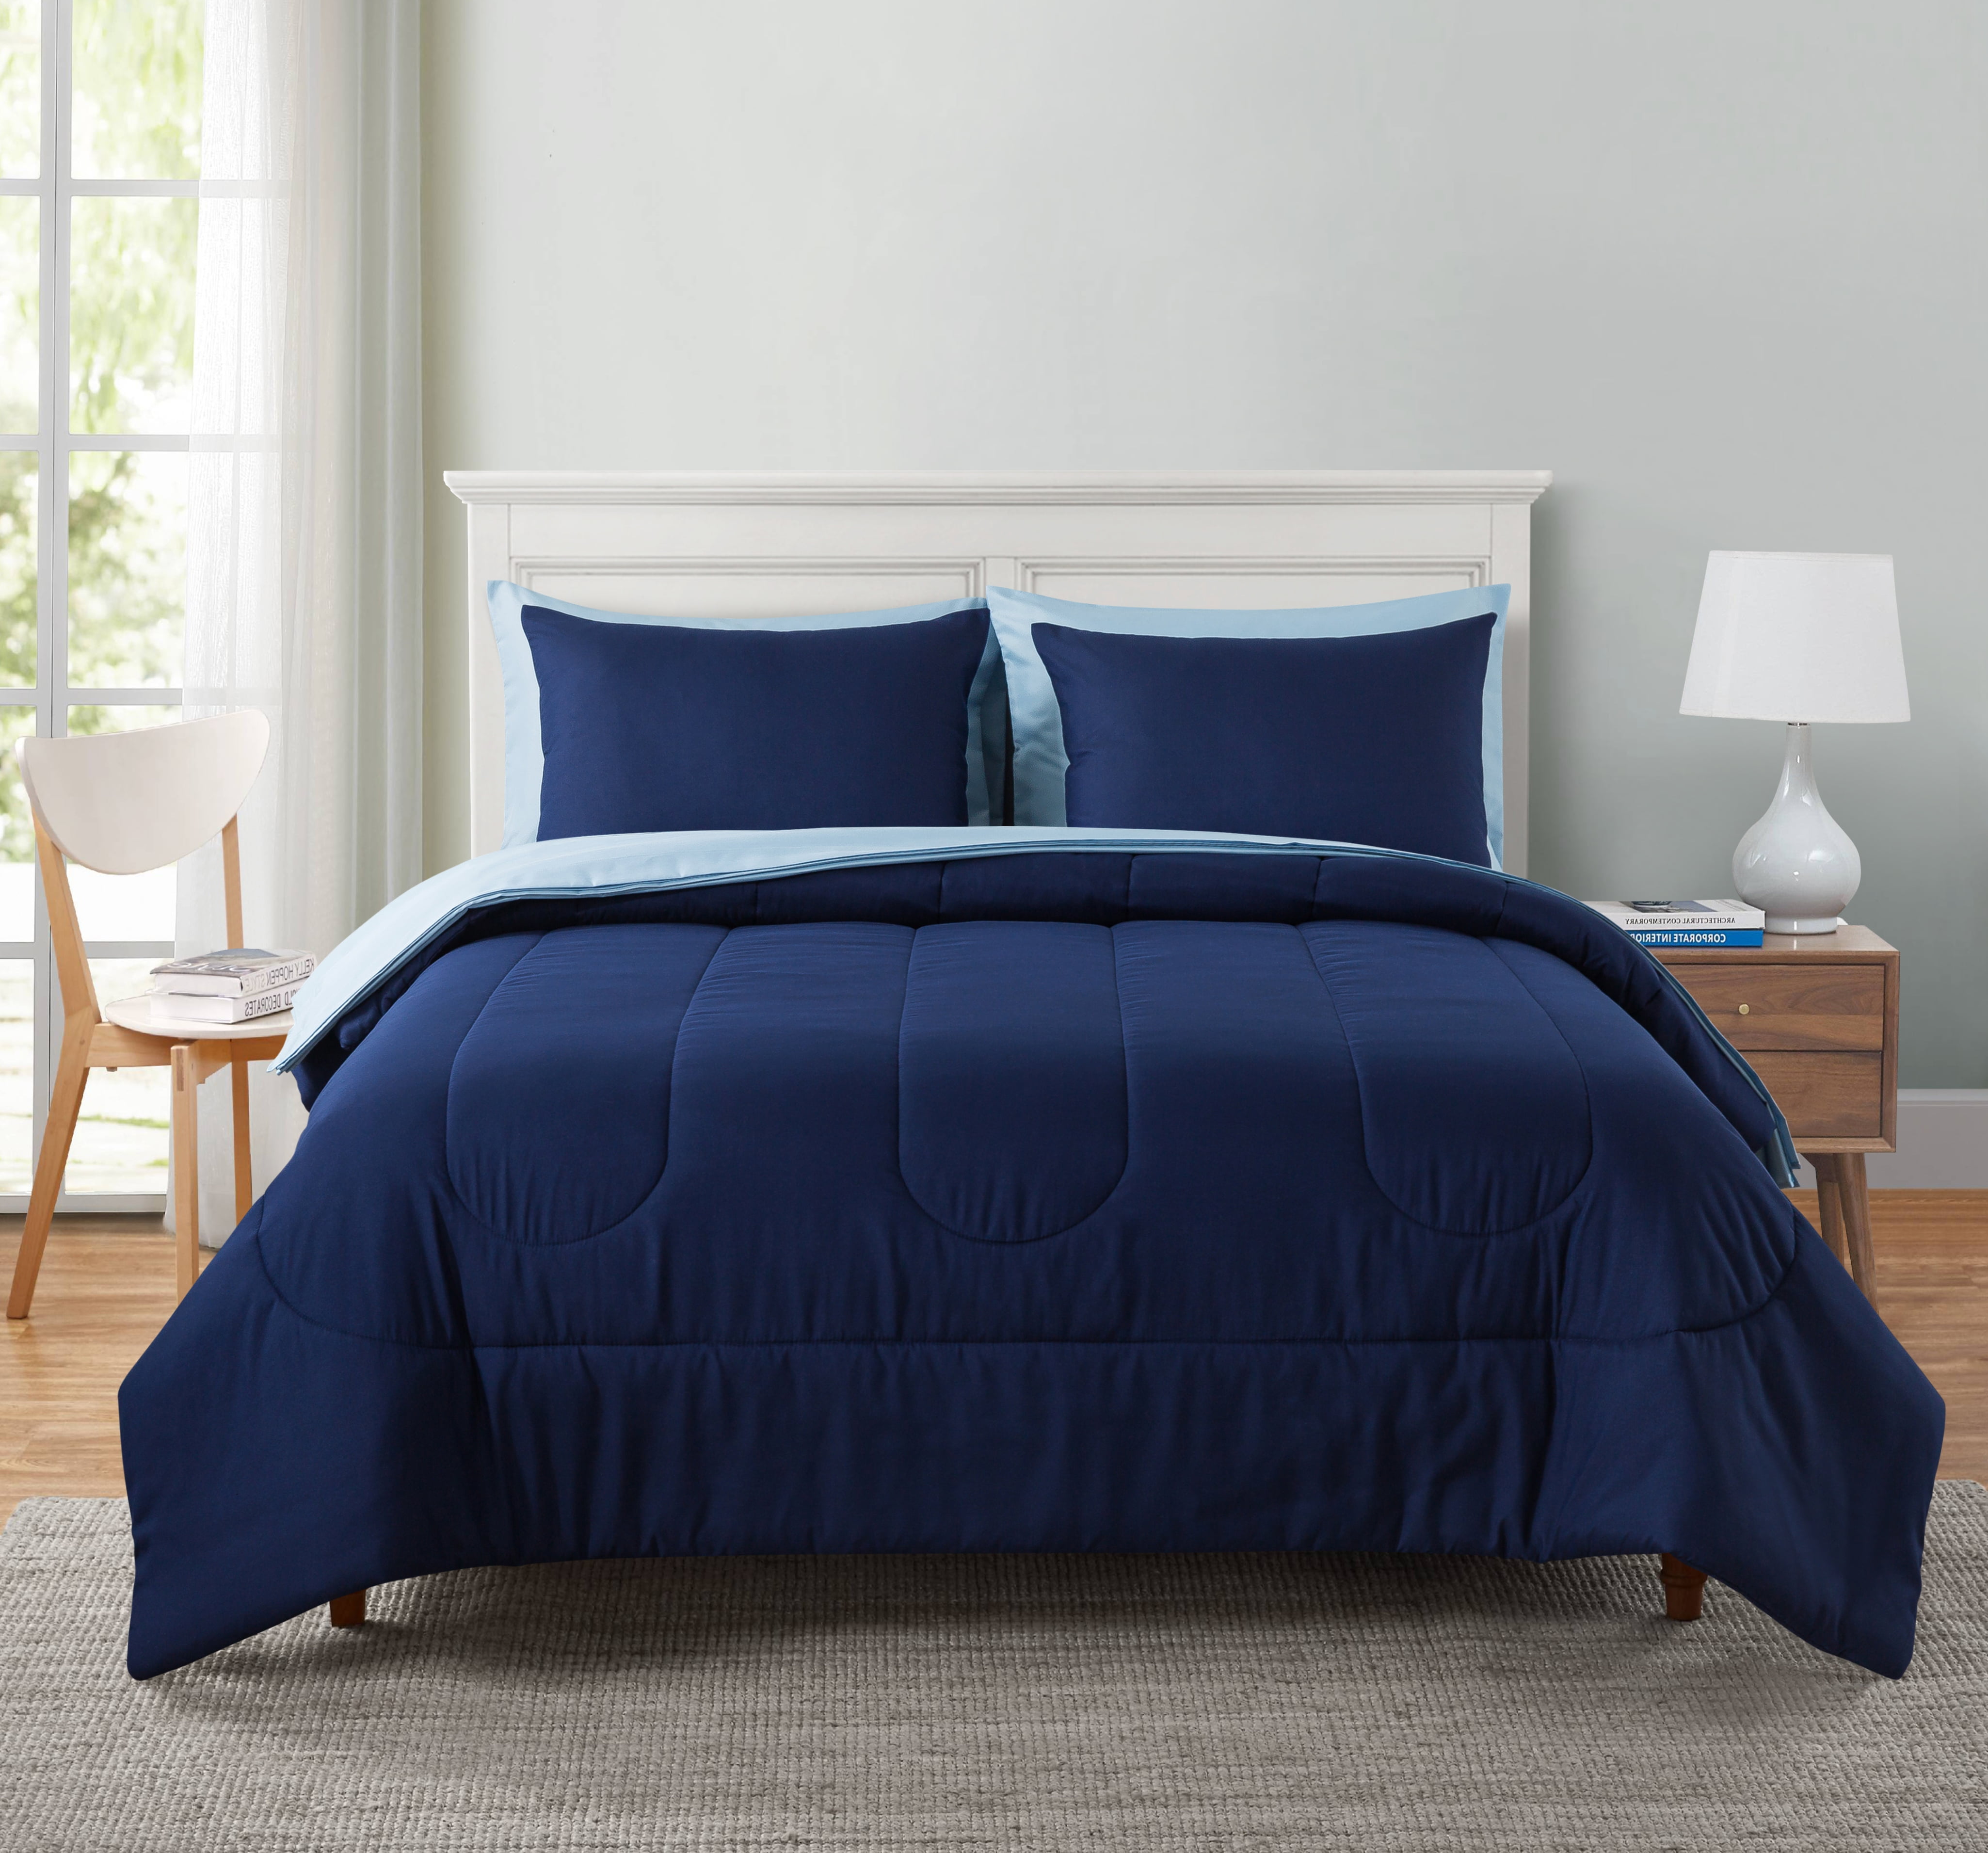 Mainstays 7-Piece Blue Bed in a Bag Comforter Set with Coverlet